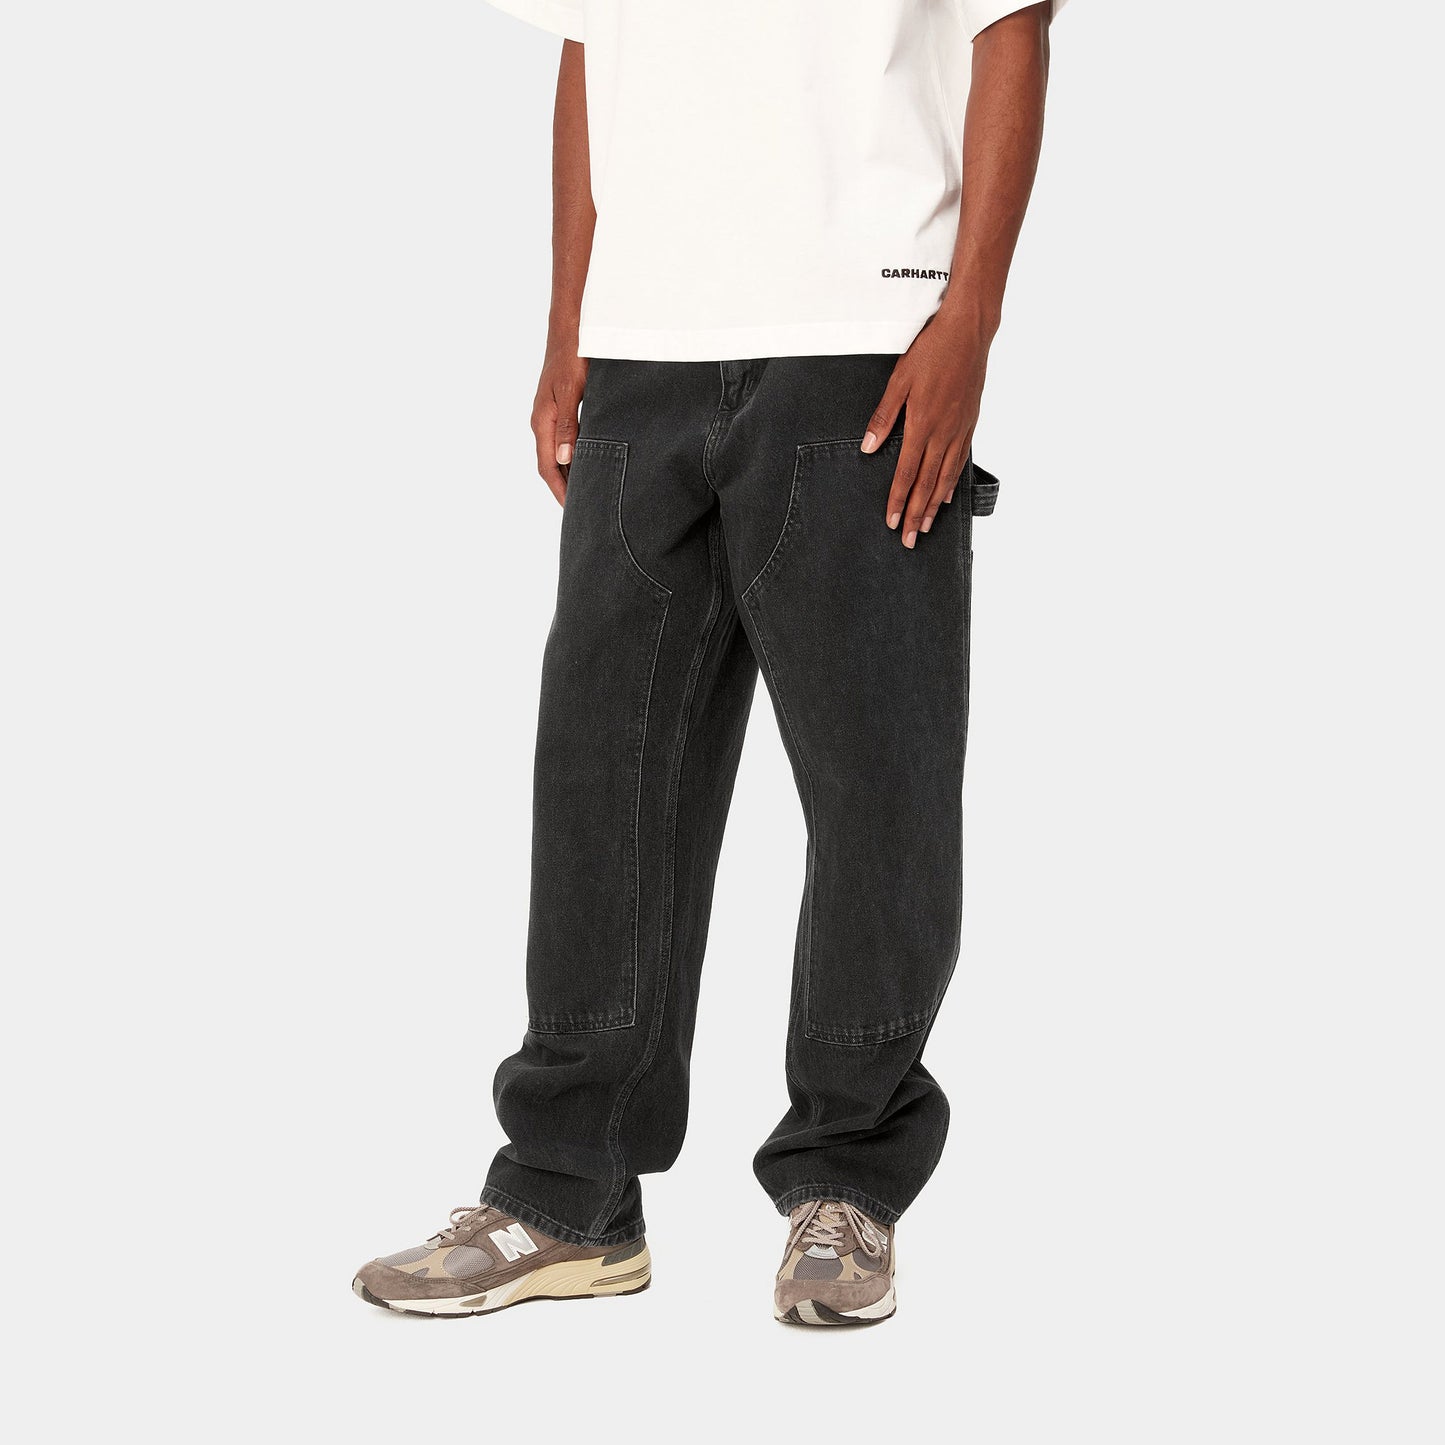 Carhartt - Double Knee Pant Black Stone Washed